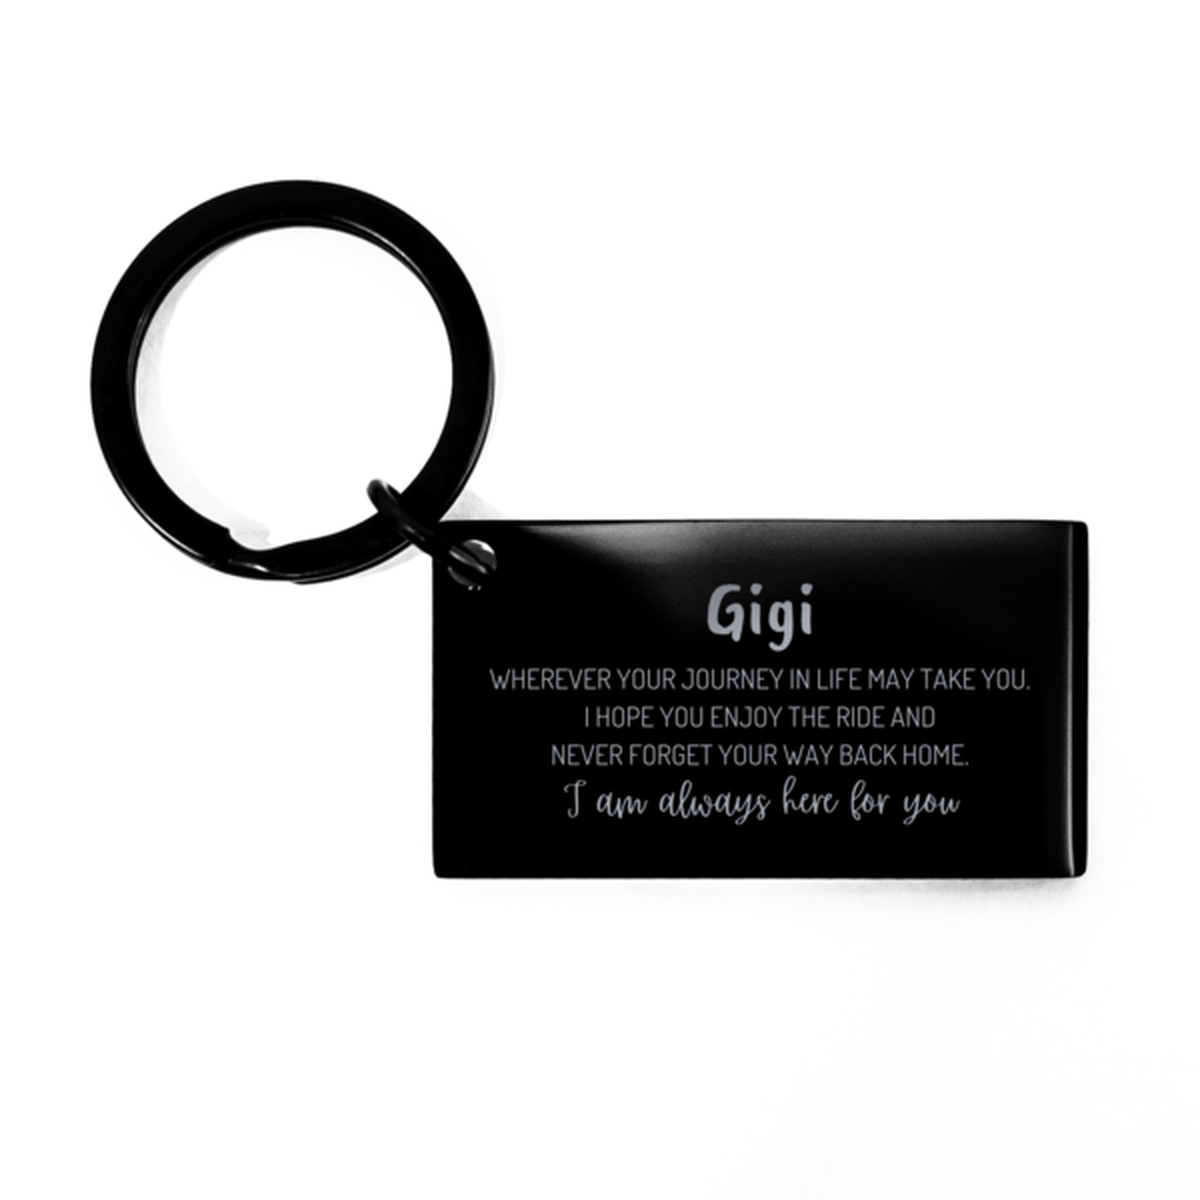 Gigi wherever your journey in life may take you, I am always here for you Gigi Keychain, Awesome Christmas Gifts For Gigi, Gigi Birthday Gifts for Men Women Family Loved One